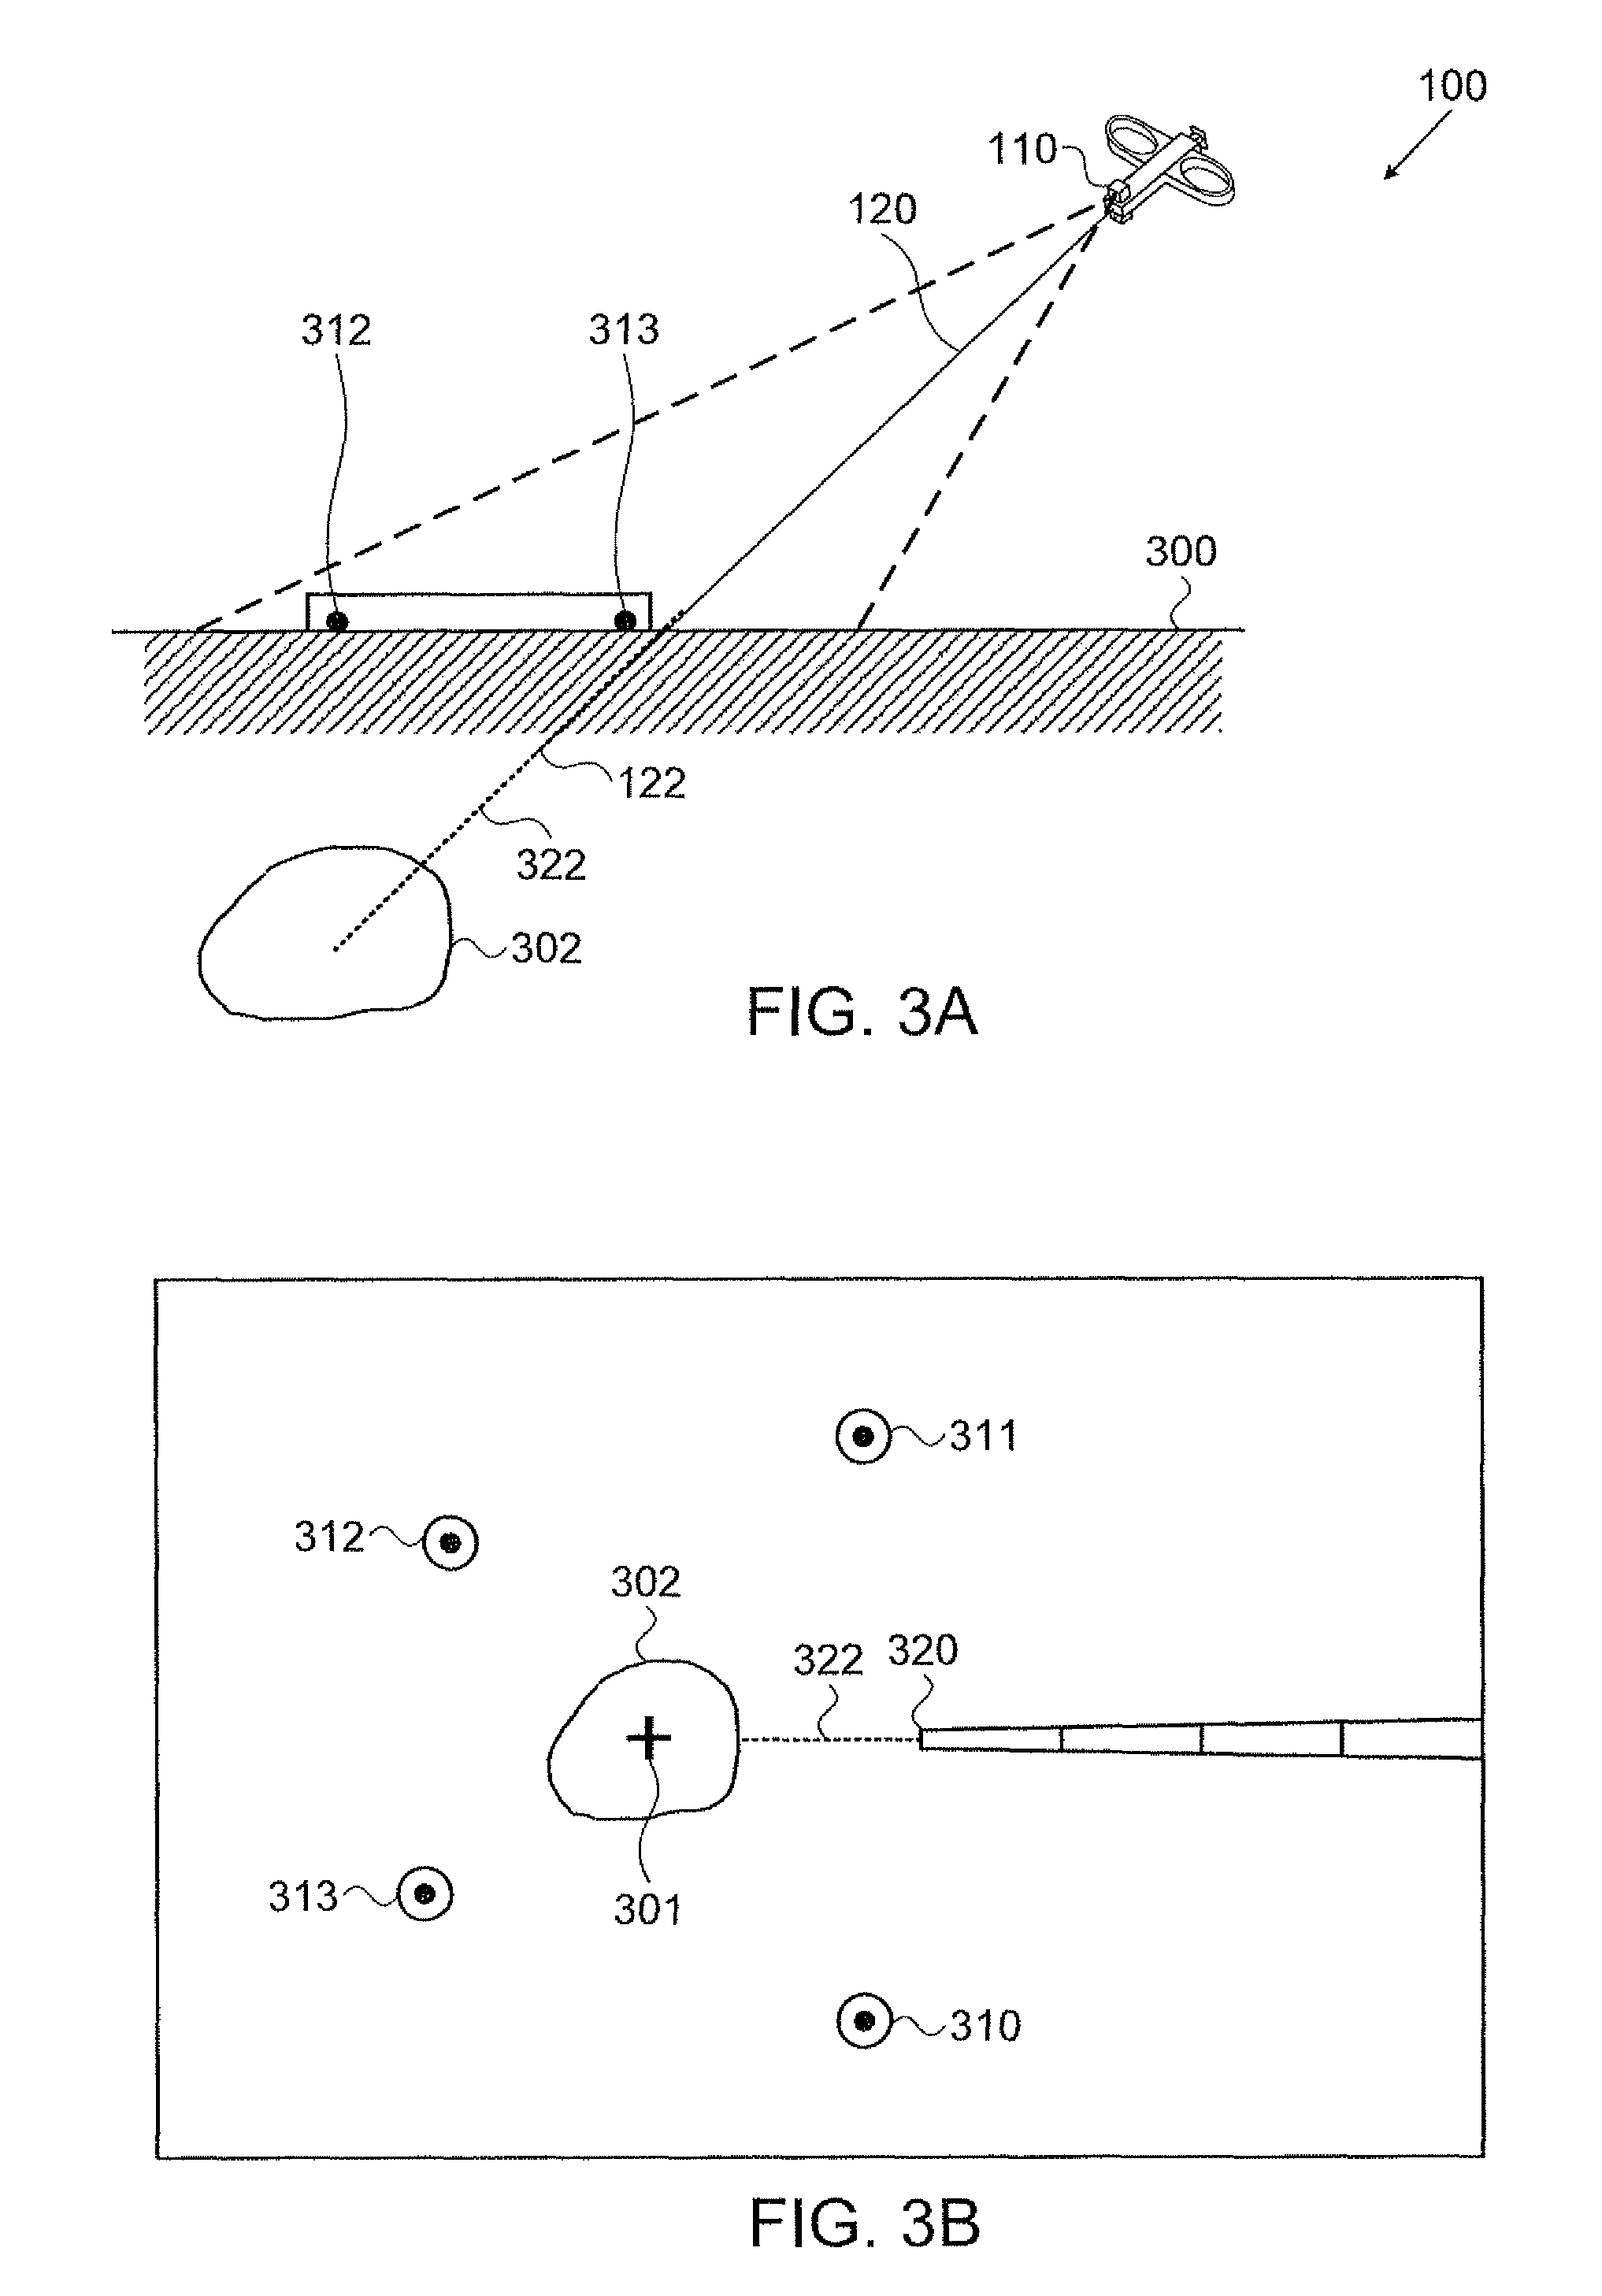 System and method for optical position measurement and guidance of a rigid or semi-flexible tool to a target